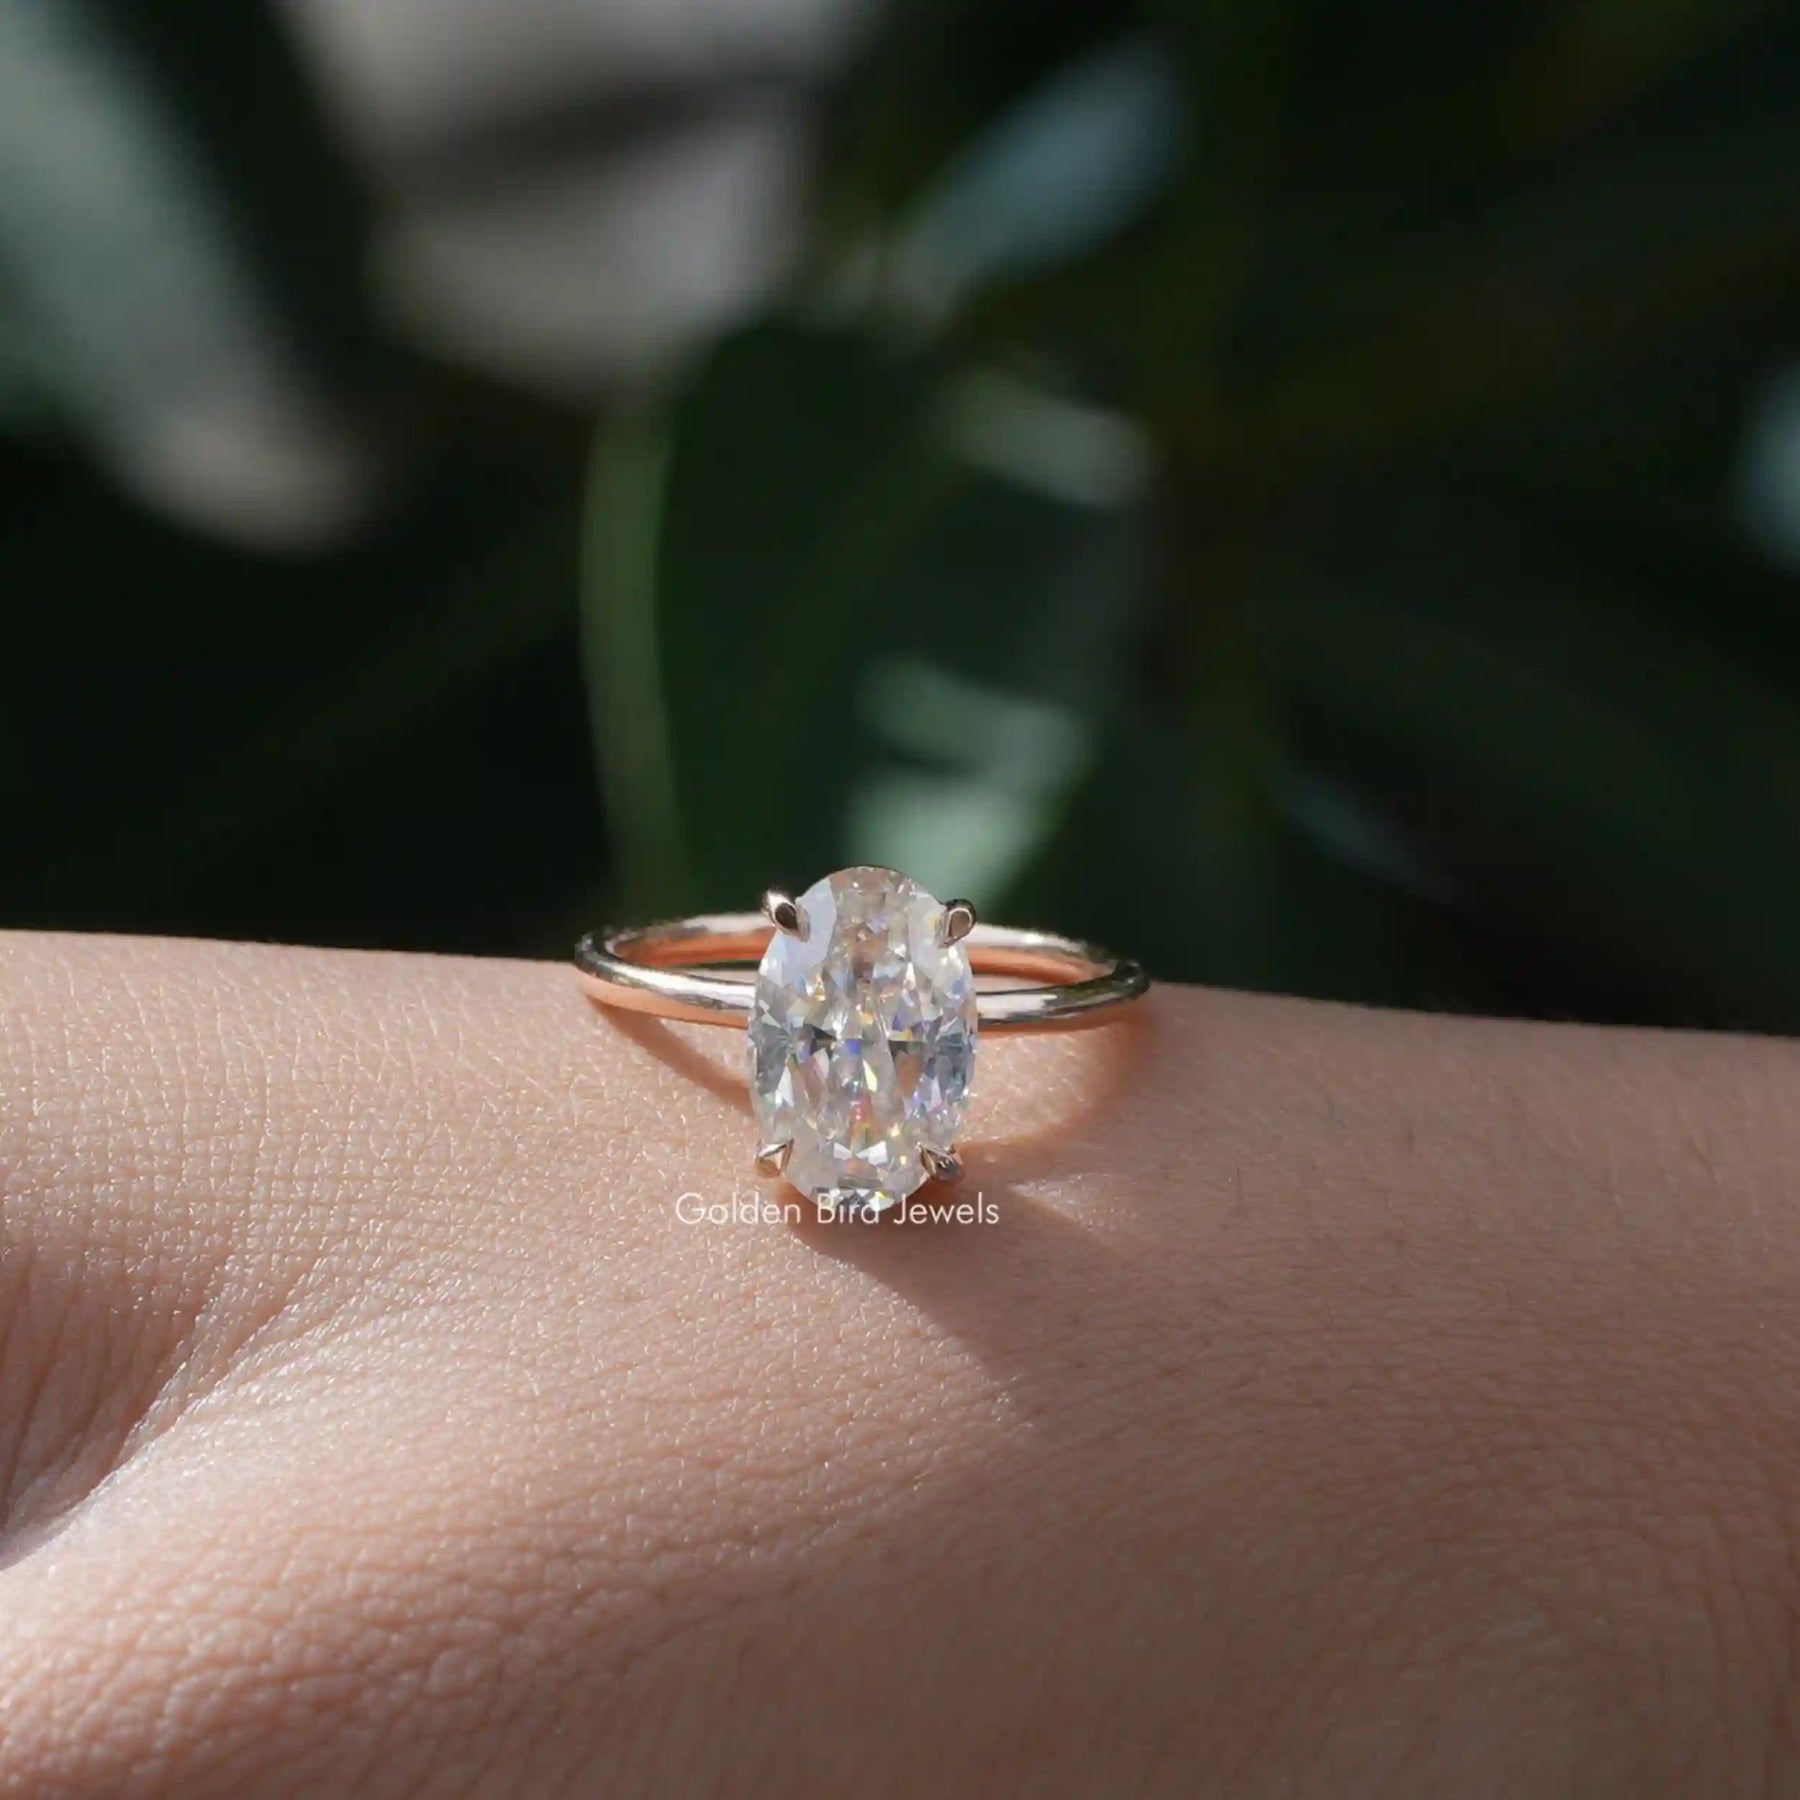 [Yellow Gold Oval Cut Moissanite Solitaire Ring]-[Golden Bird Jewels]